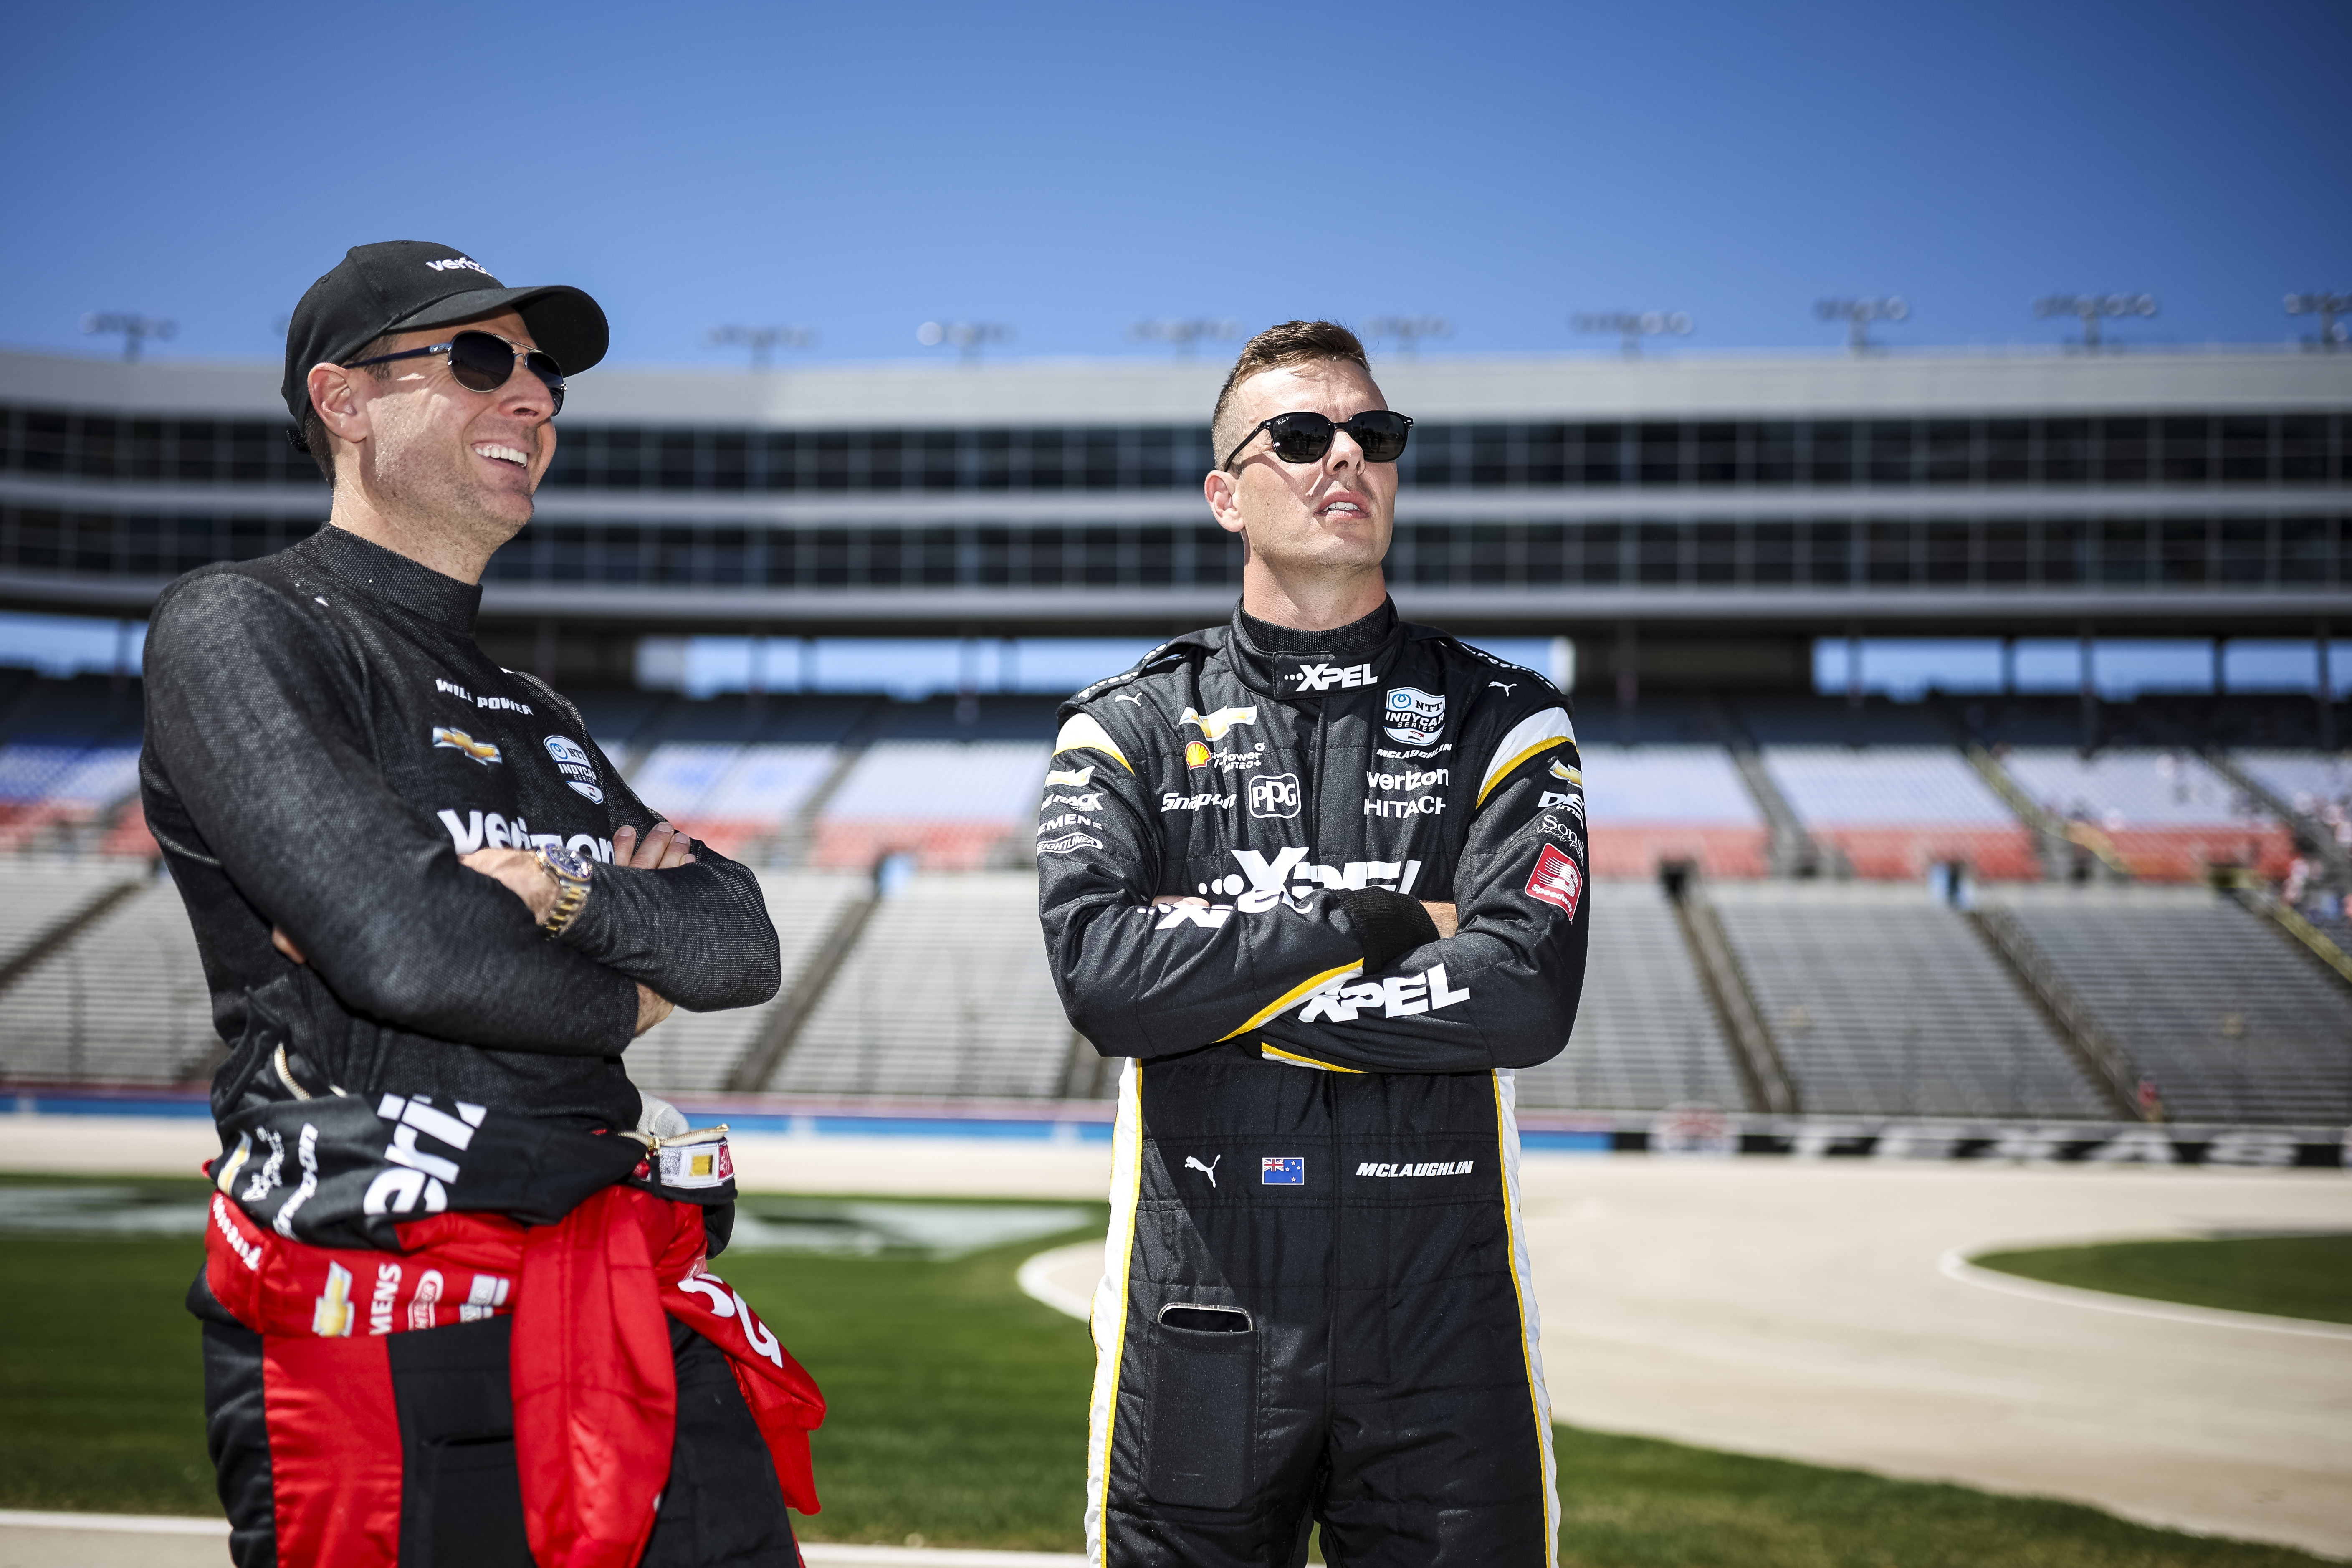 Will Power (left) with teammate Scott McLaughlin at Texas Motor Speedway.